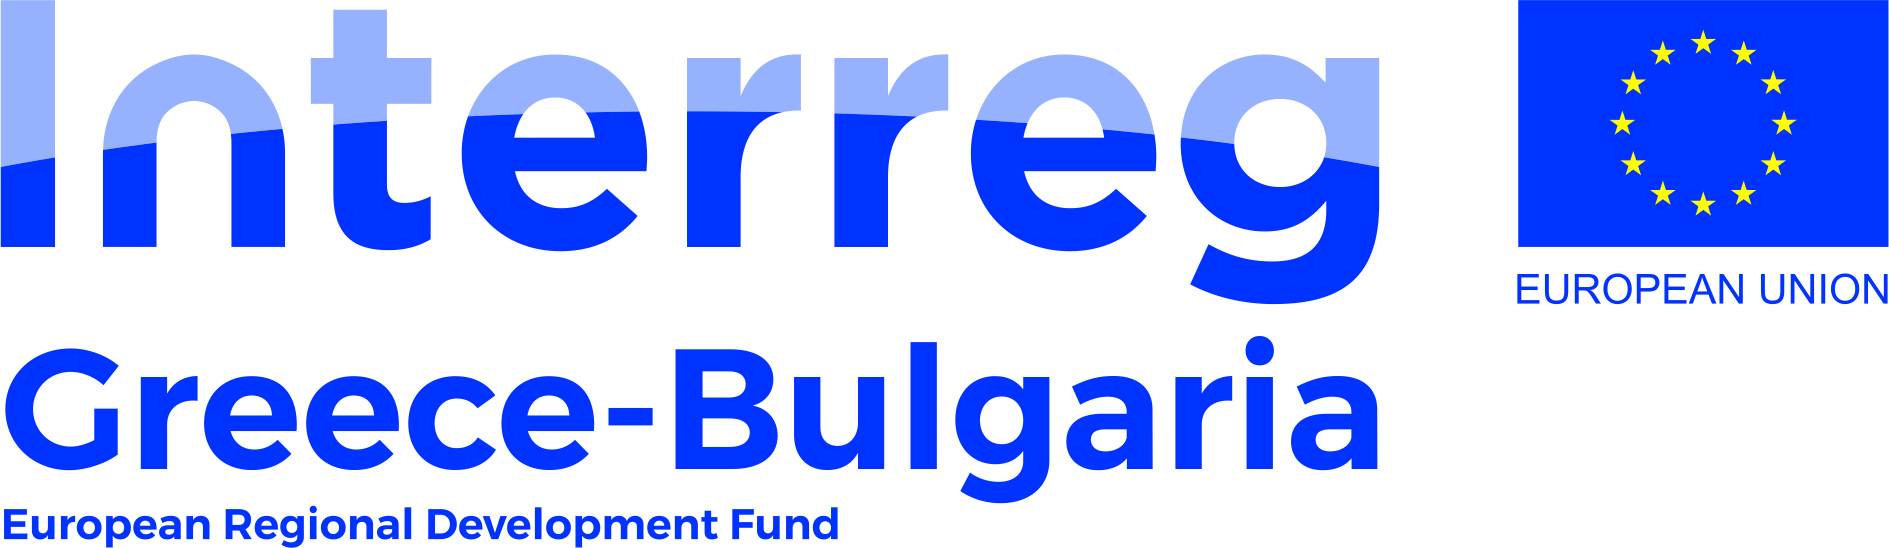 A FEW WORDS ABOUT THE COOPERATION PROGRAMME “GREECE-BULGARIA 2014-2020”